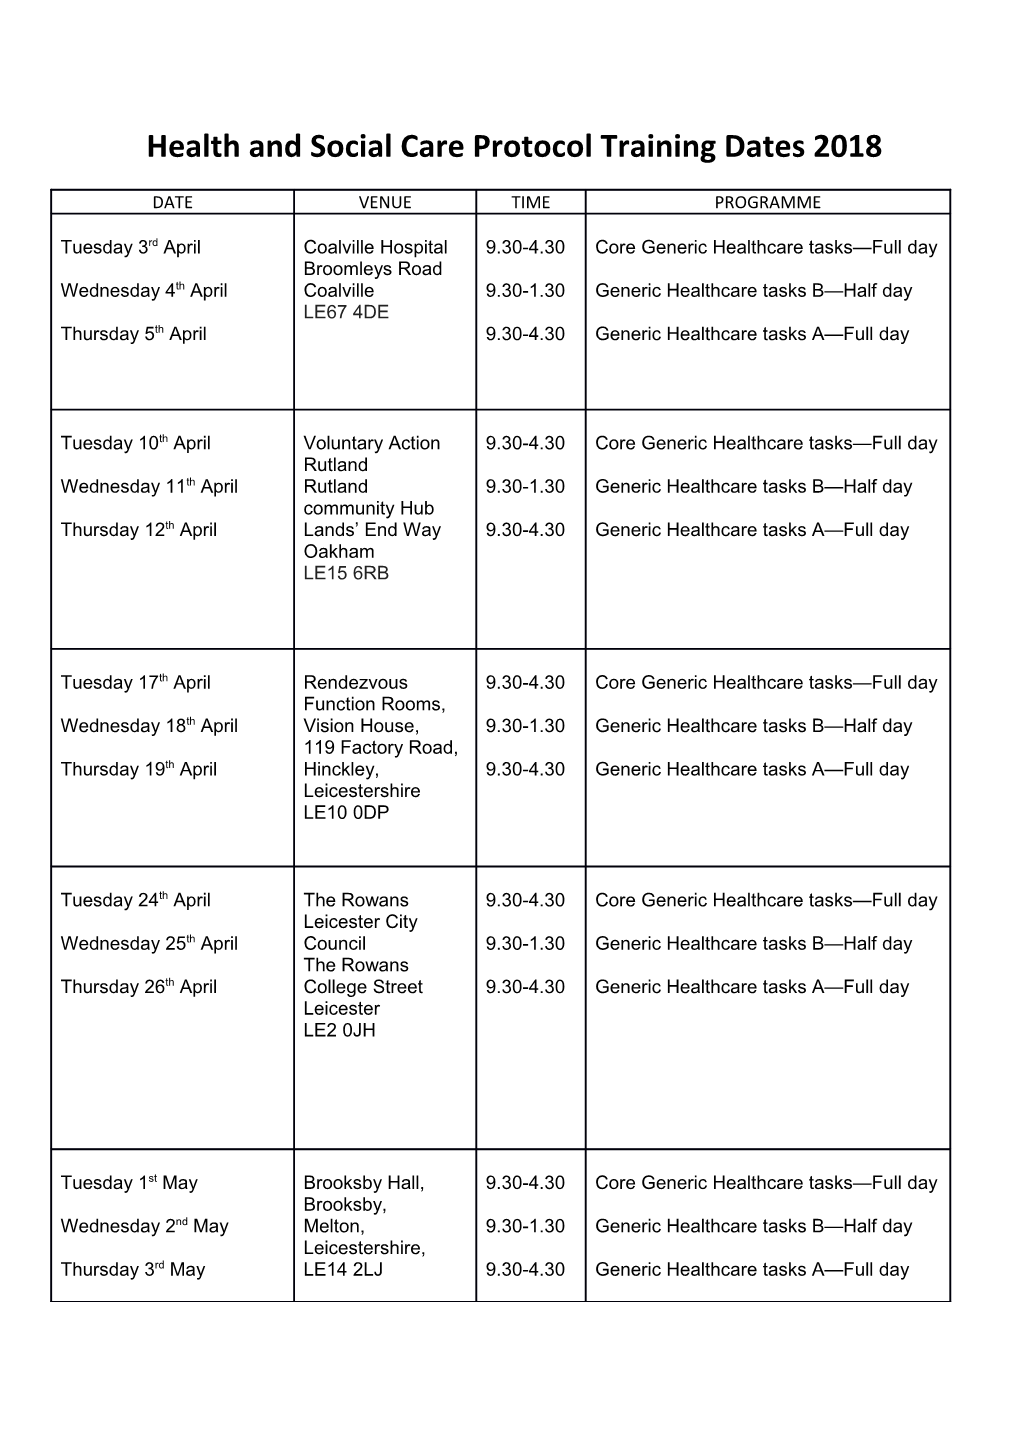 Health and Social Care Protocol Training Dates 2018